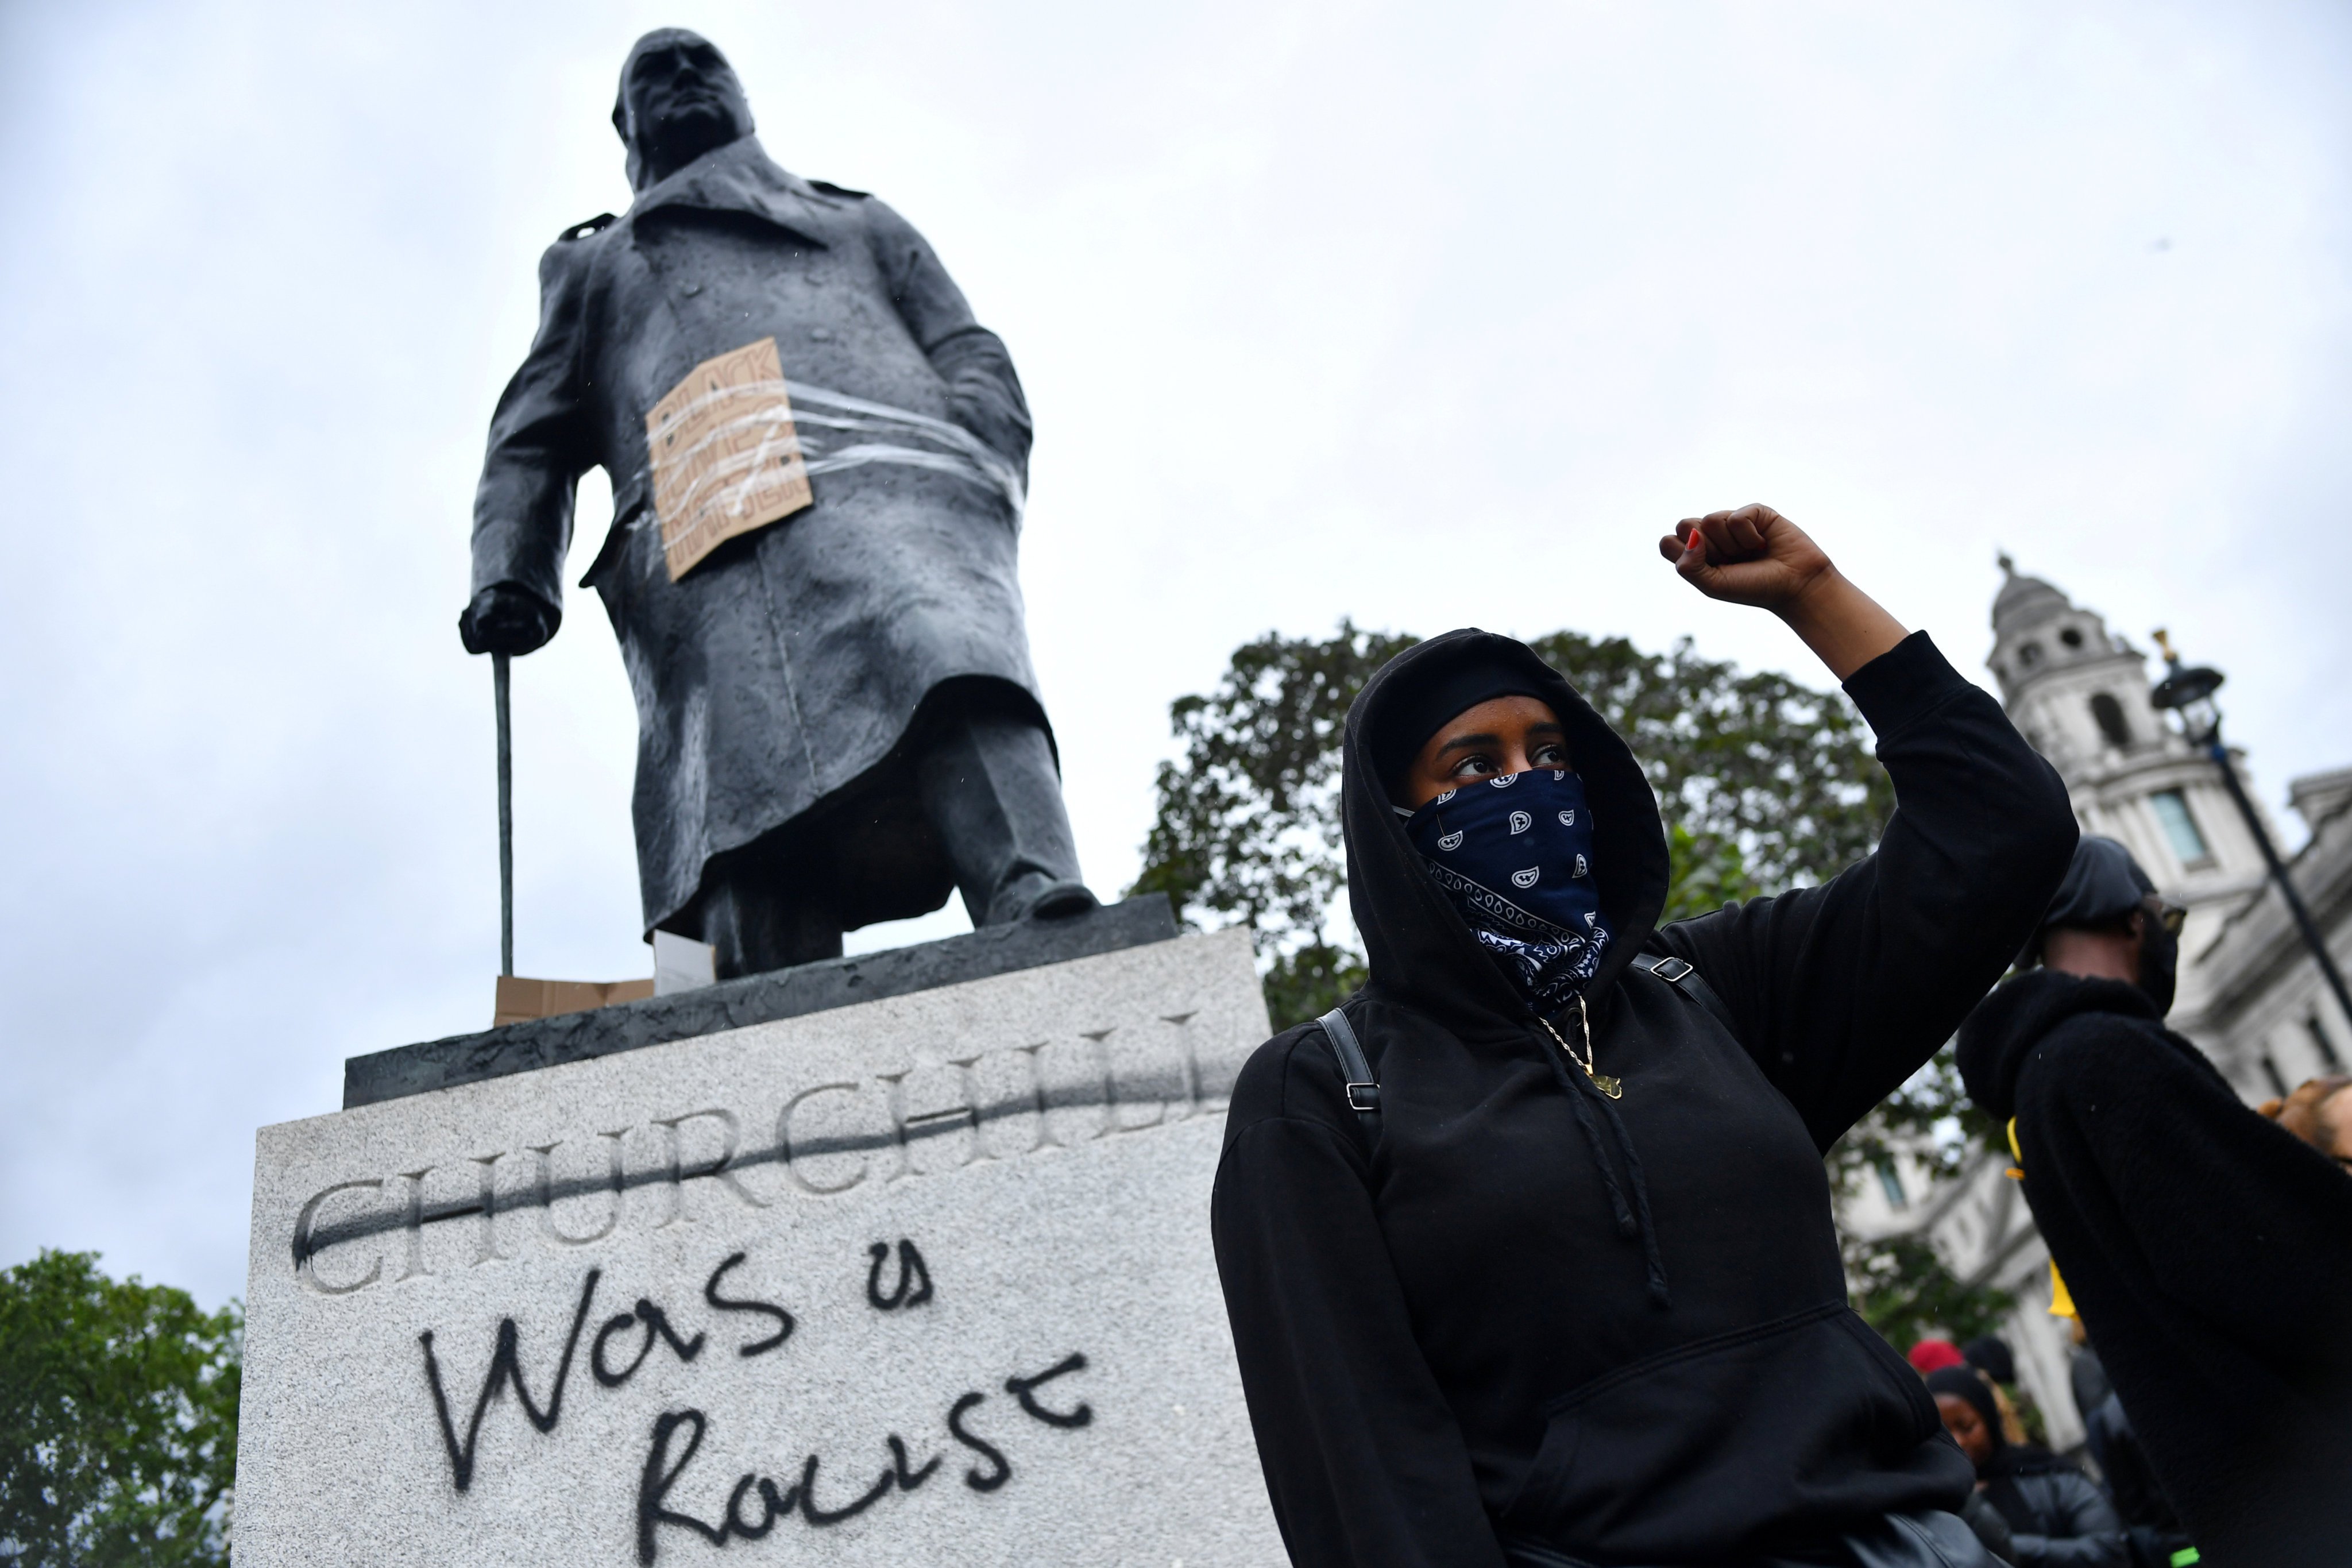 Black Lives Matter protests in front a statue of Winston Churchill in London’s Parliament Square. Photo: Reuters